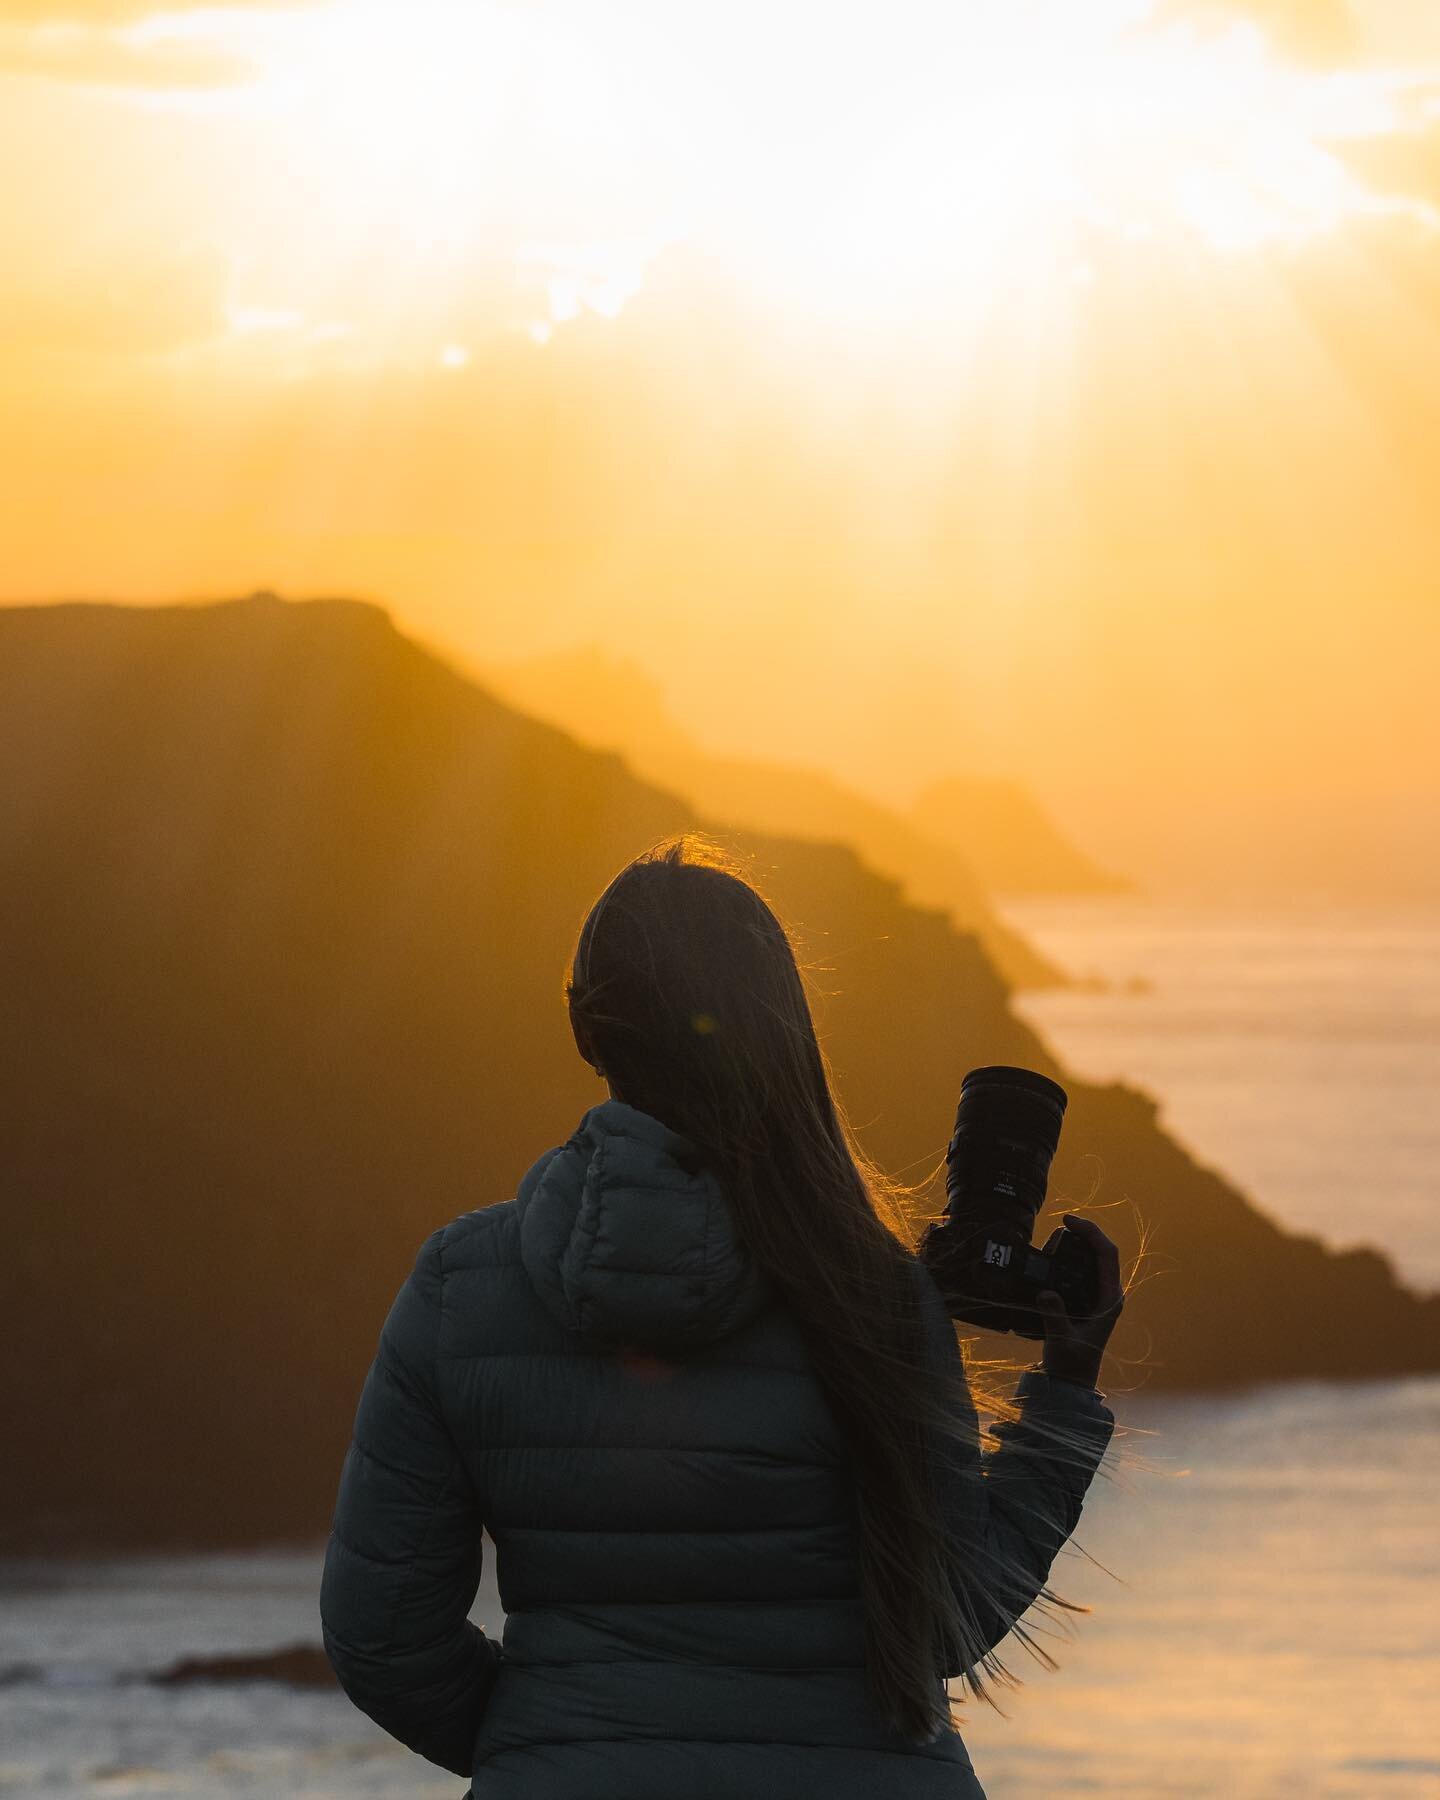 Sunset views of Skomer Island ☀️ 

Tip: If you want the best view of Skomer Island without visiting the island itself, head to Deer Park. This wild headland sits at the end of the Marloes Peninsula and is next to the tiny port where the boats depart 